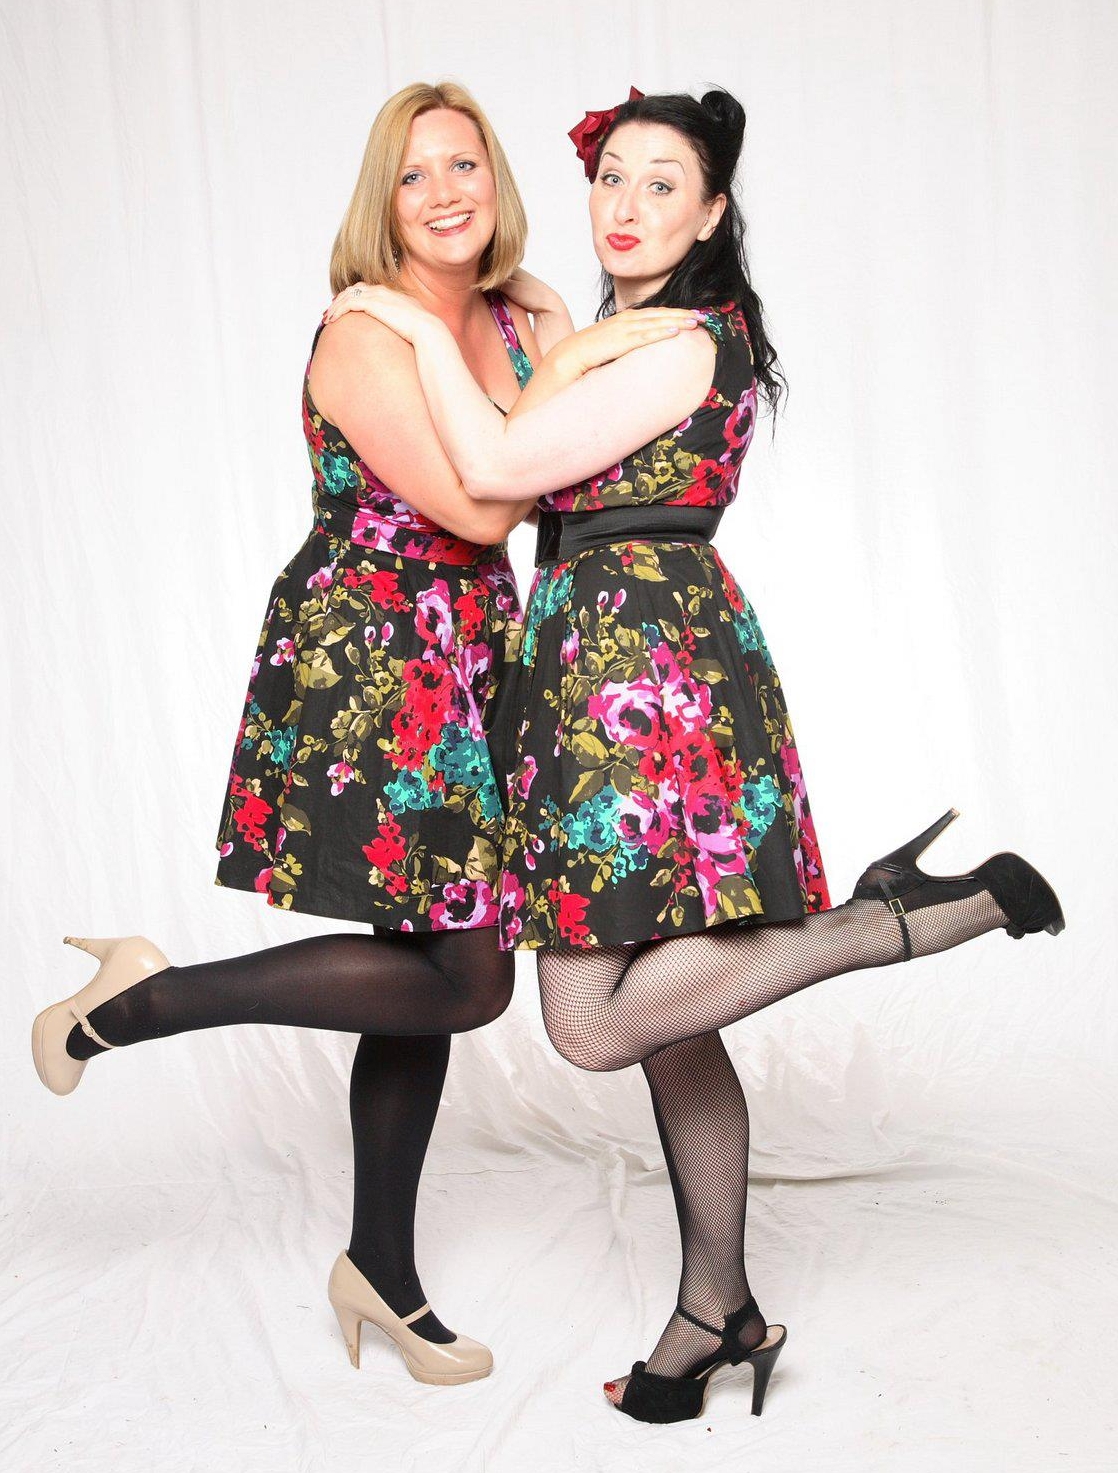 Two BBWs wearing Black Opaque Tights and Black Fishnet Pantyhose and Coloured Mini Dresses